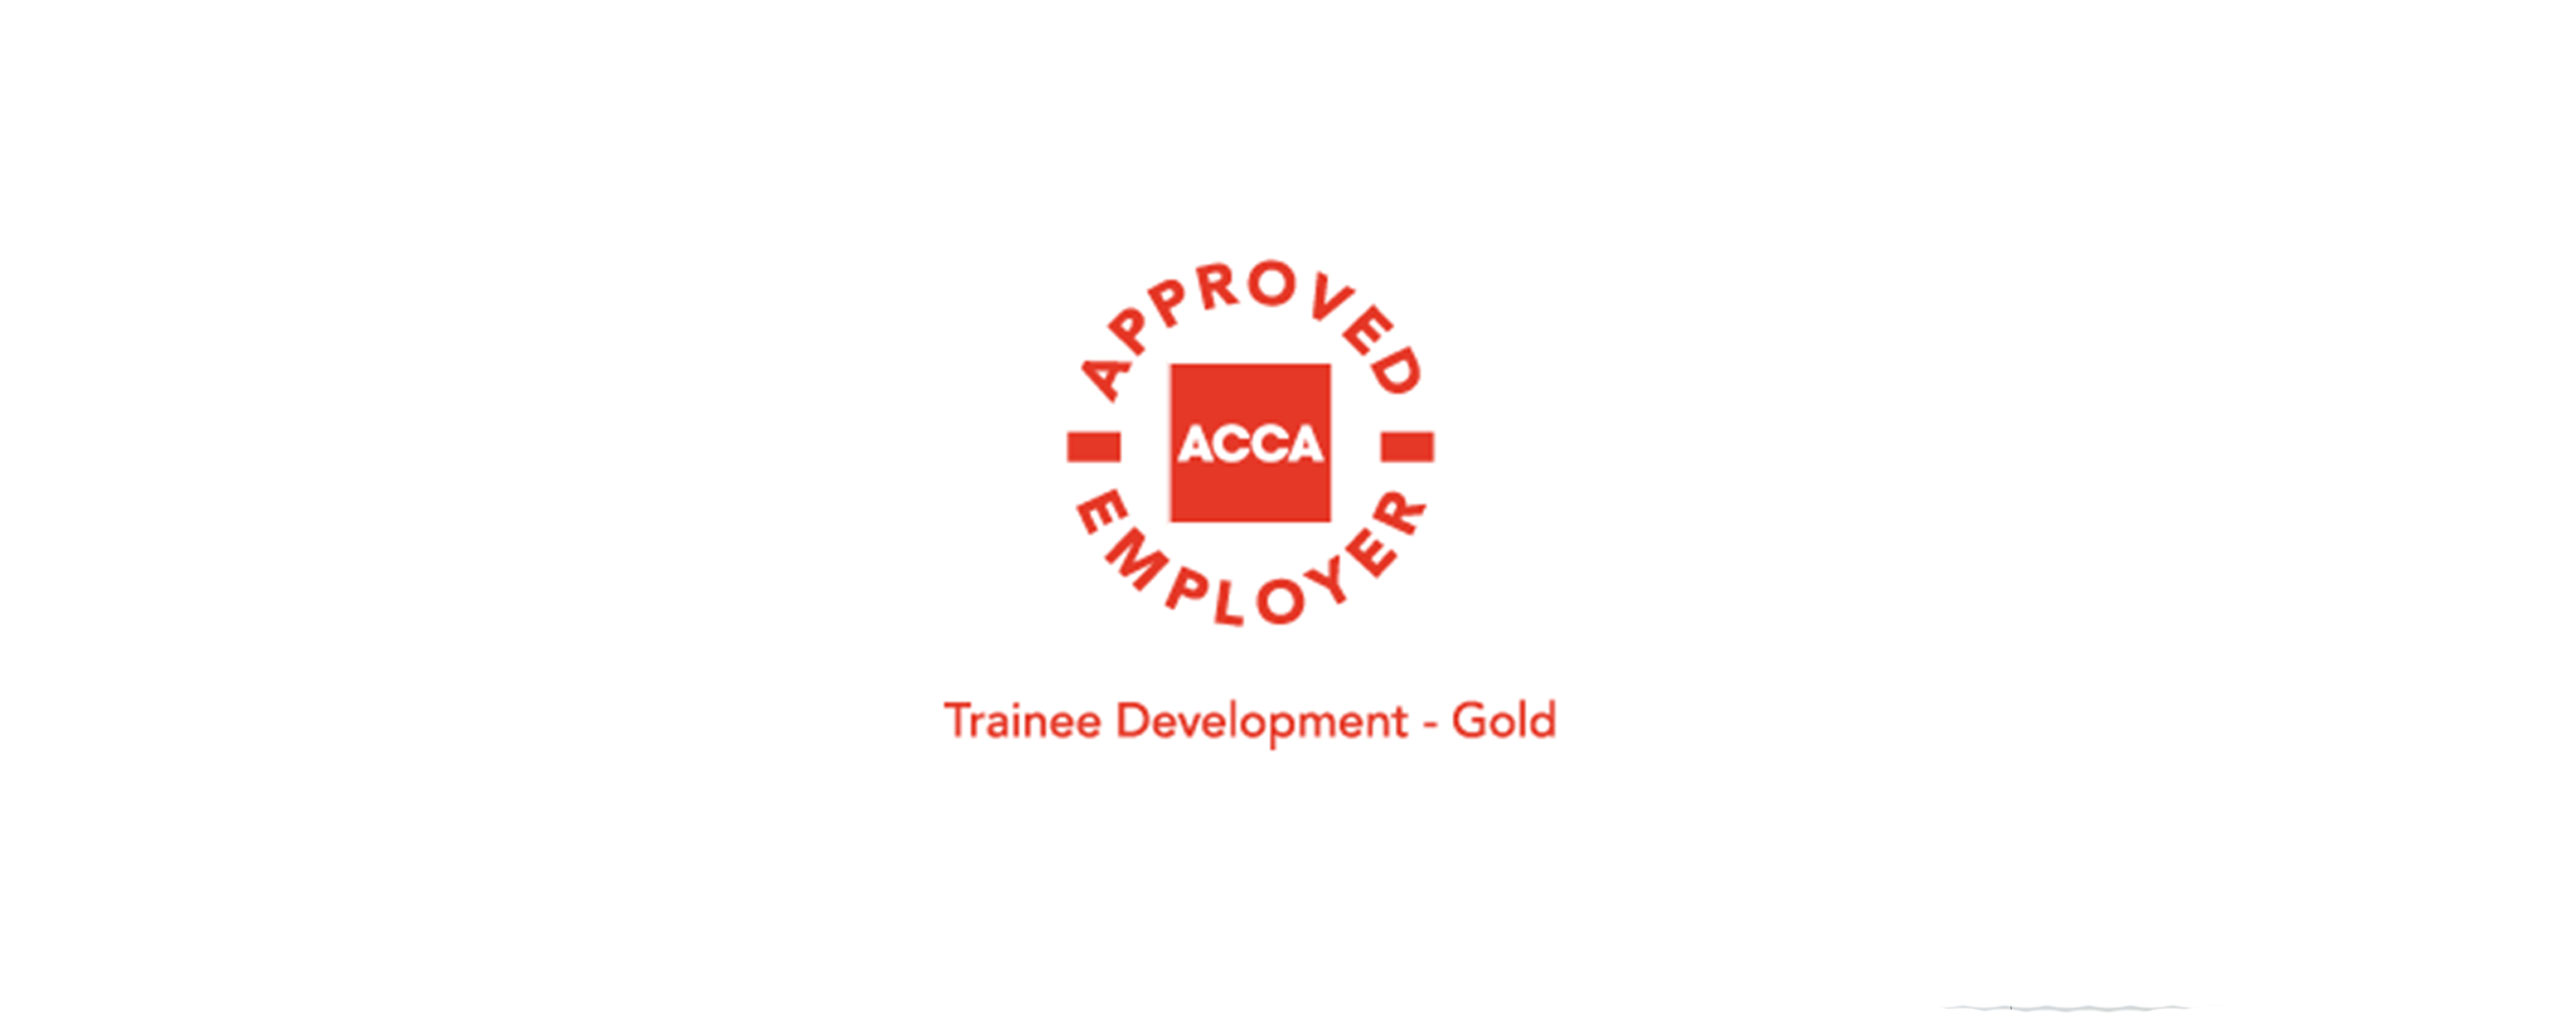 ACCA APPROVED EMPLOYER